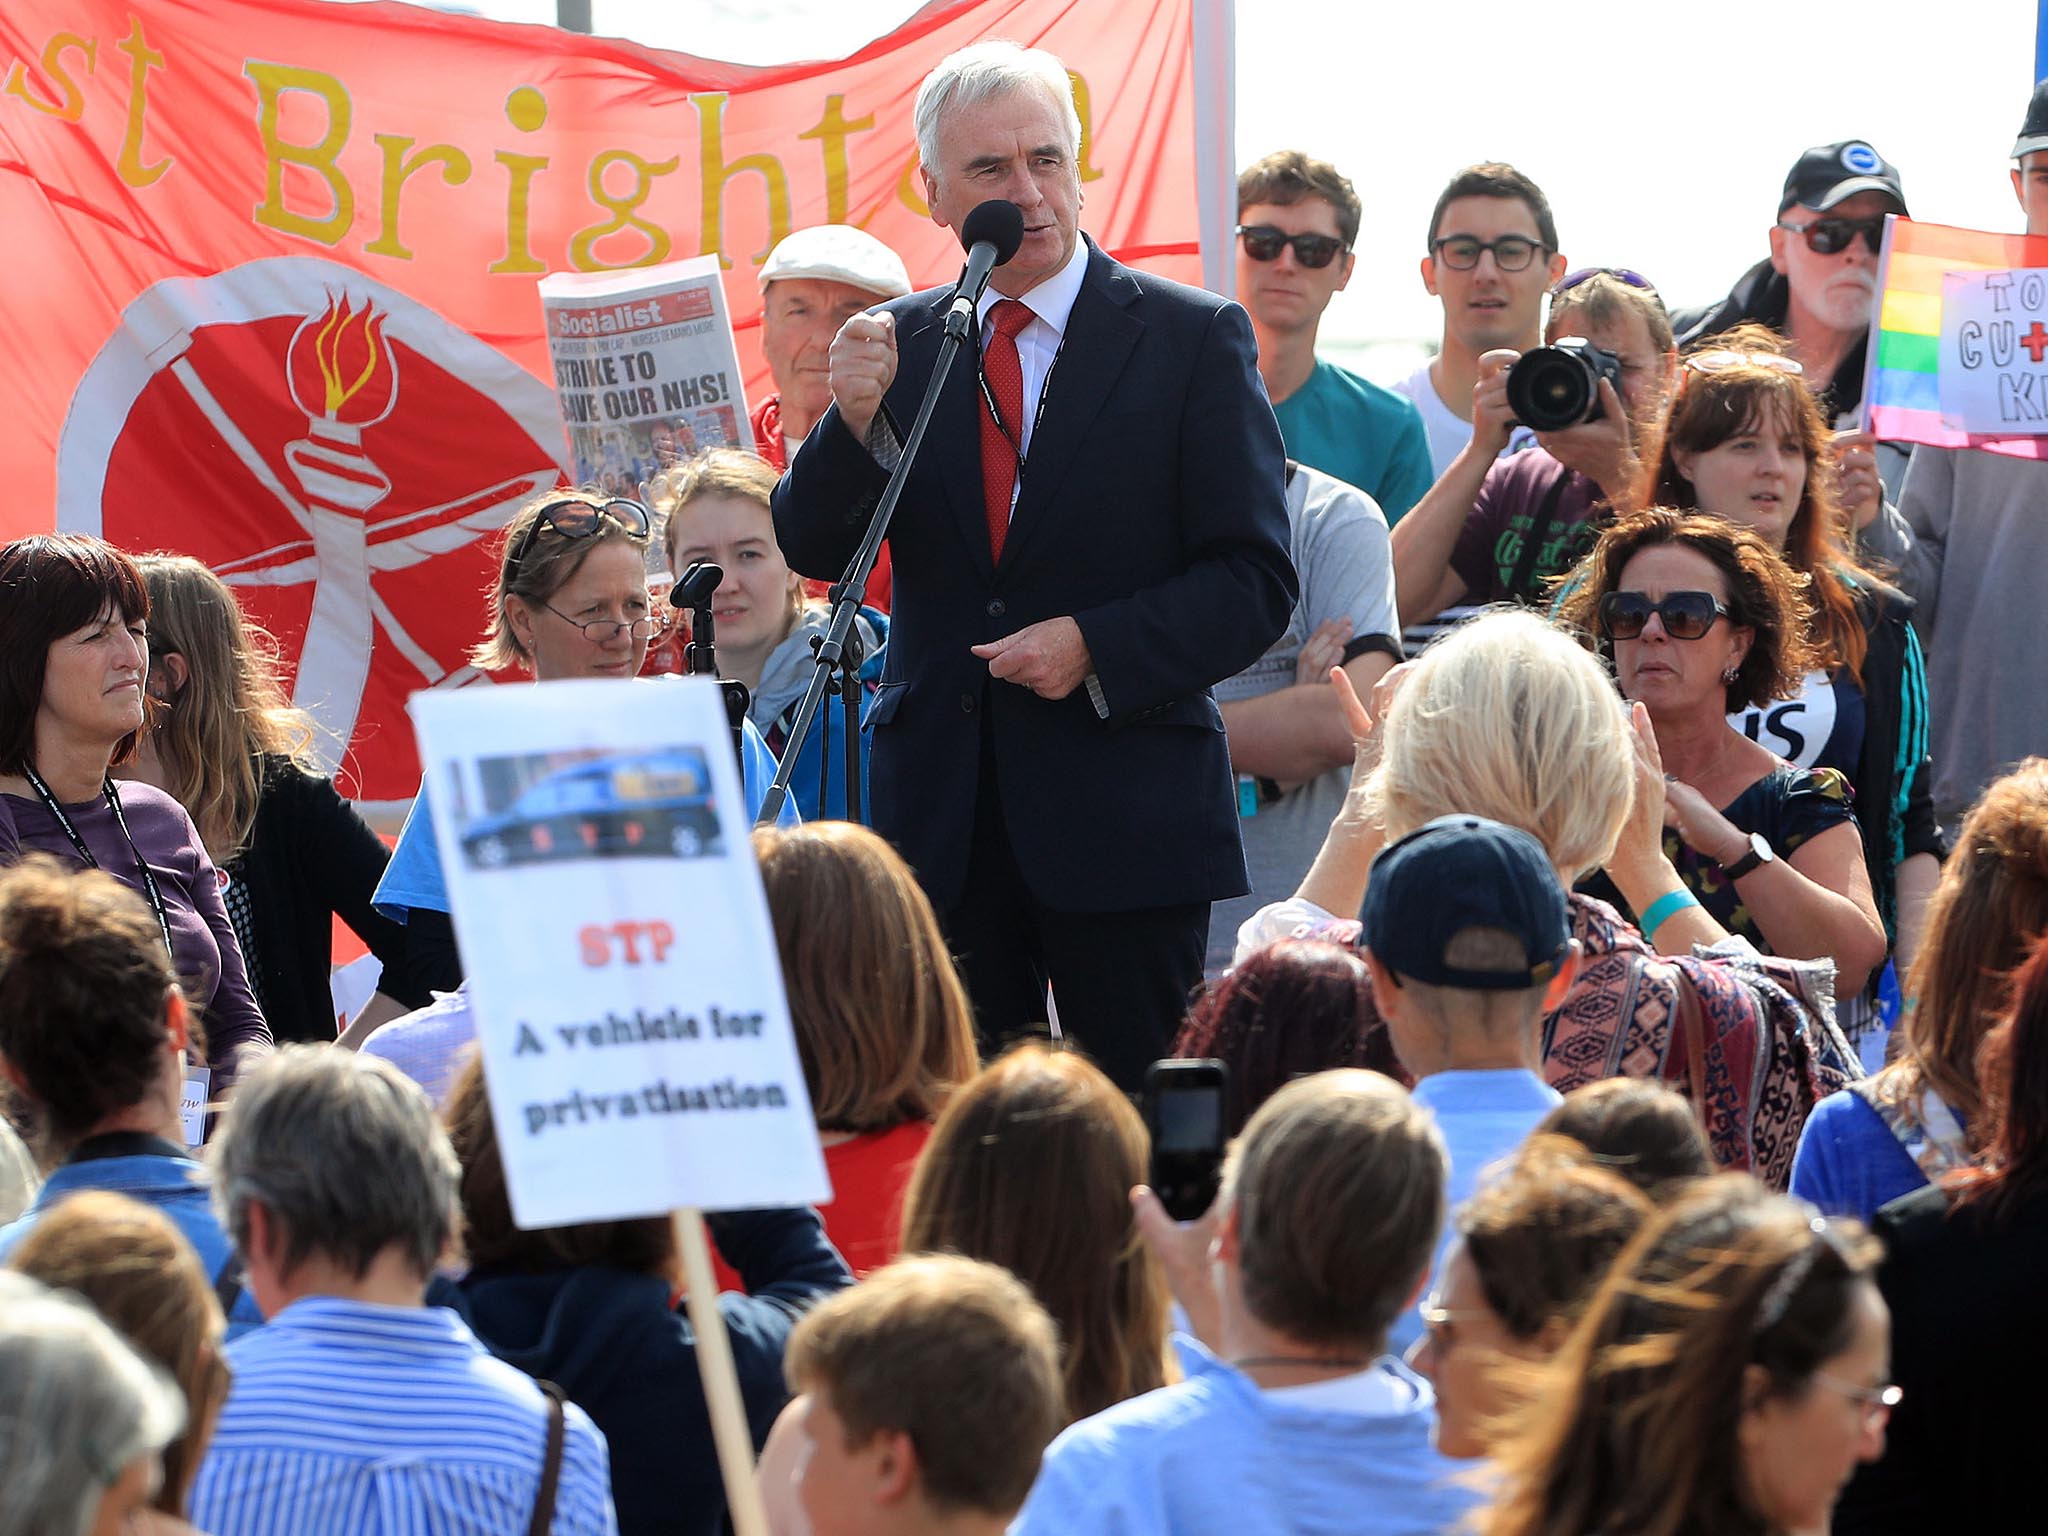 John McDonnell speaks to Labour supporters ahead of his conference speech in Brighton